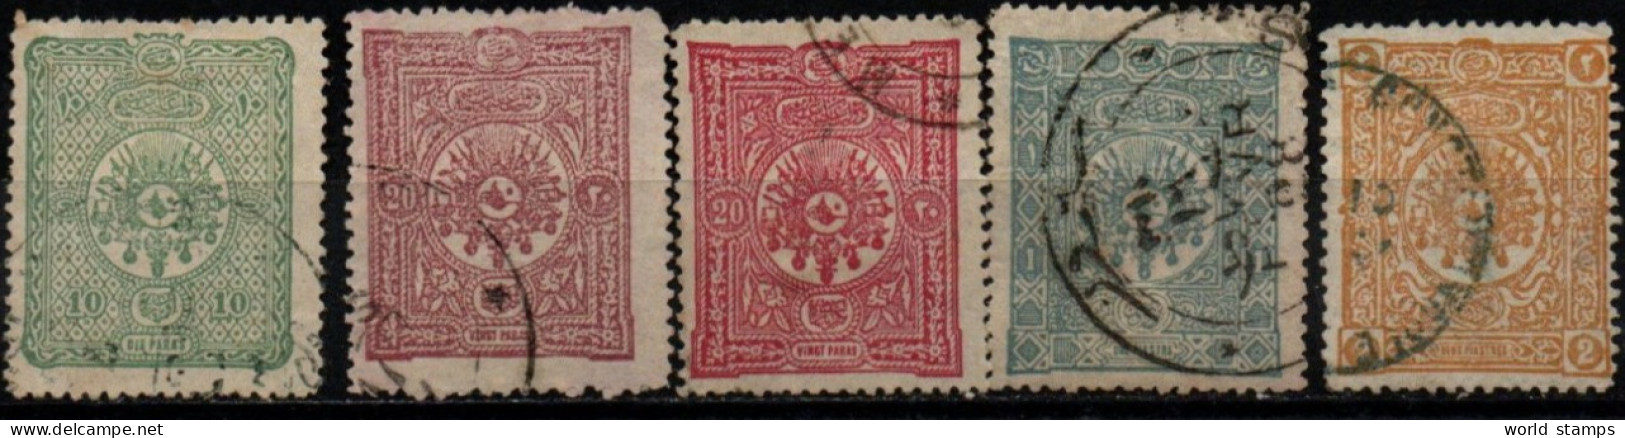 TURQUIE 1892-9 O - Used Stamps